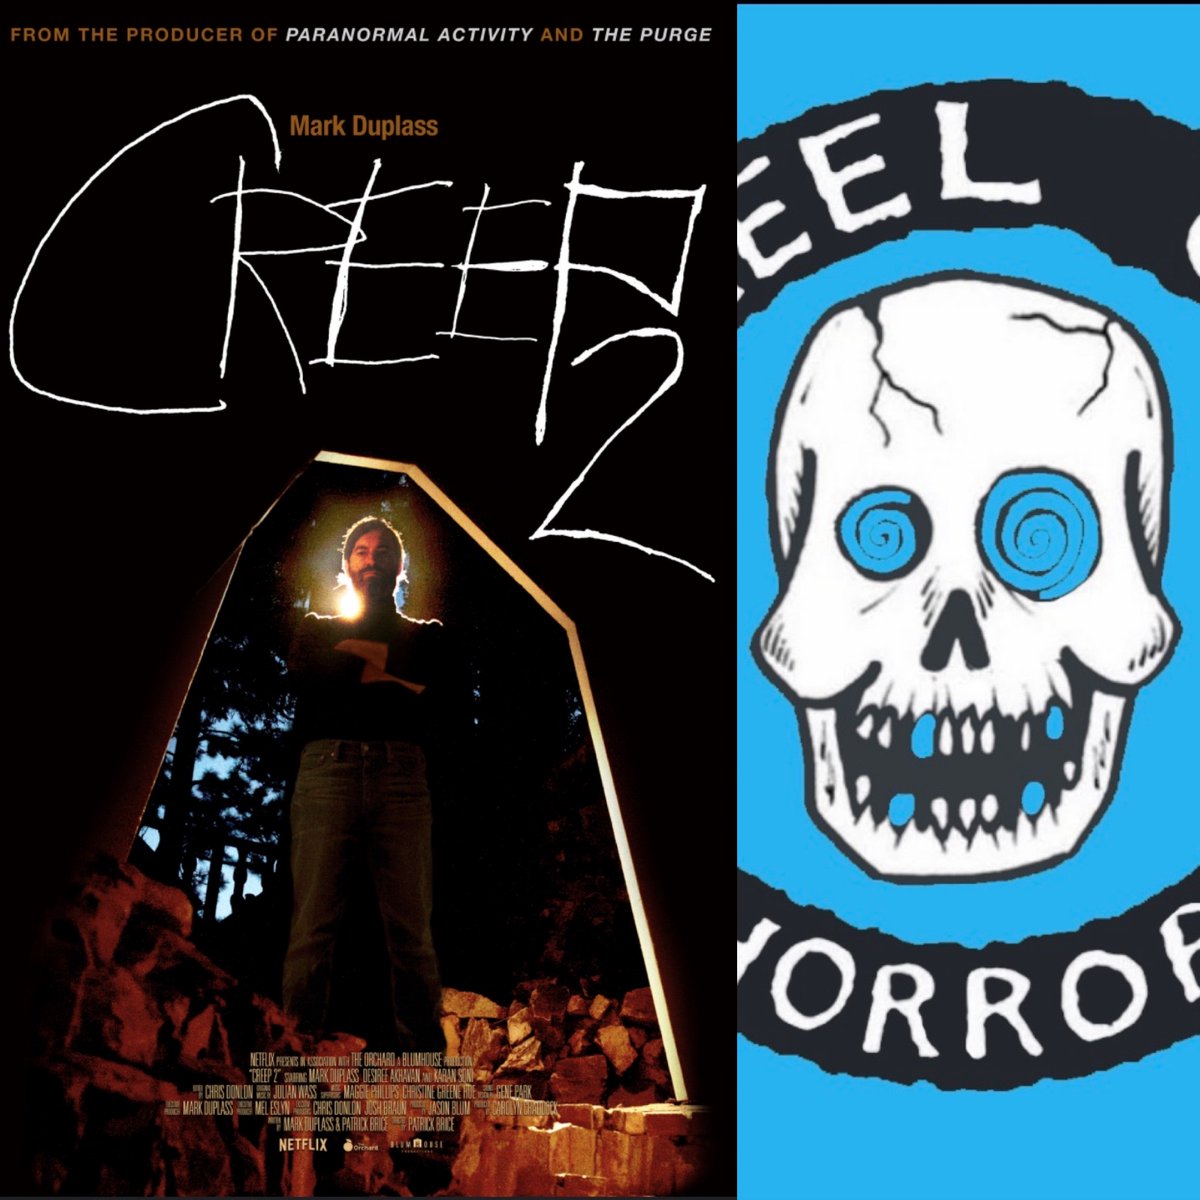 He's Creepy and he's kooky, mysterious, and spooky...This guy is not from the Addam's family,Join Alec & Erik as they discuss the follow up to an amazing found footage indie horror film, 2017's Creep 2. Enjoy! Link to Episode: api.spreaker.com/v2/episodes/59…